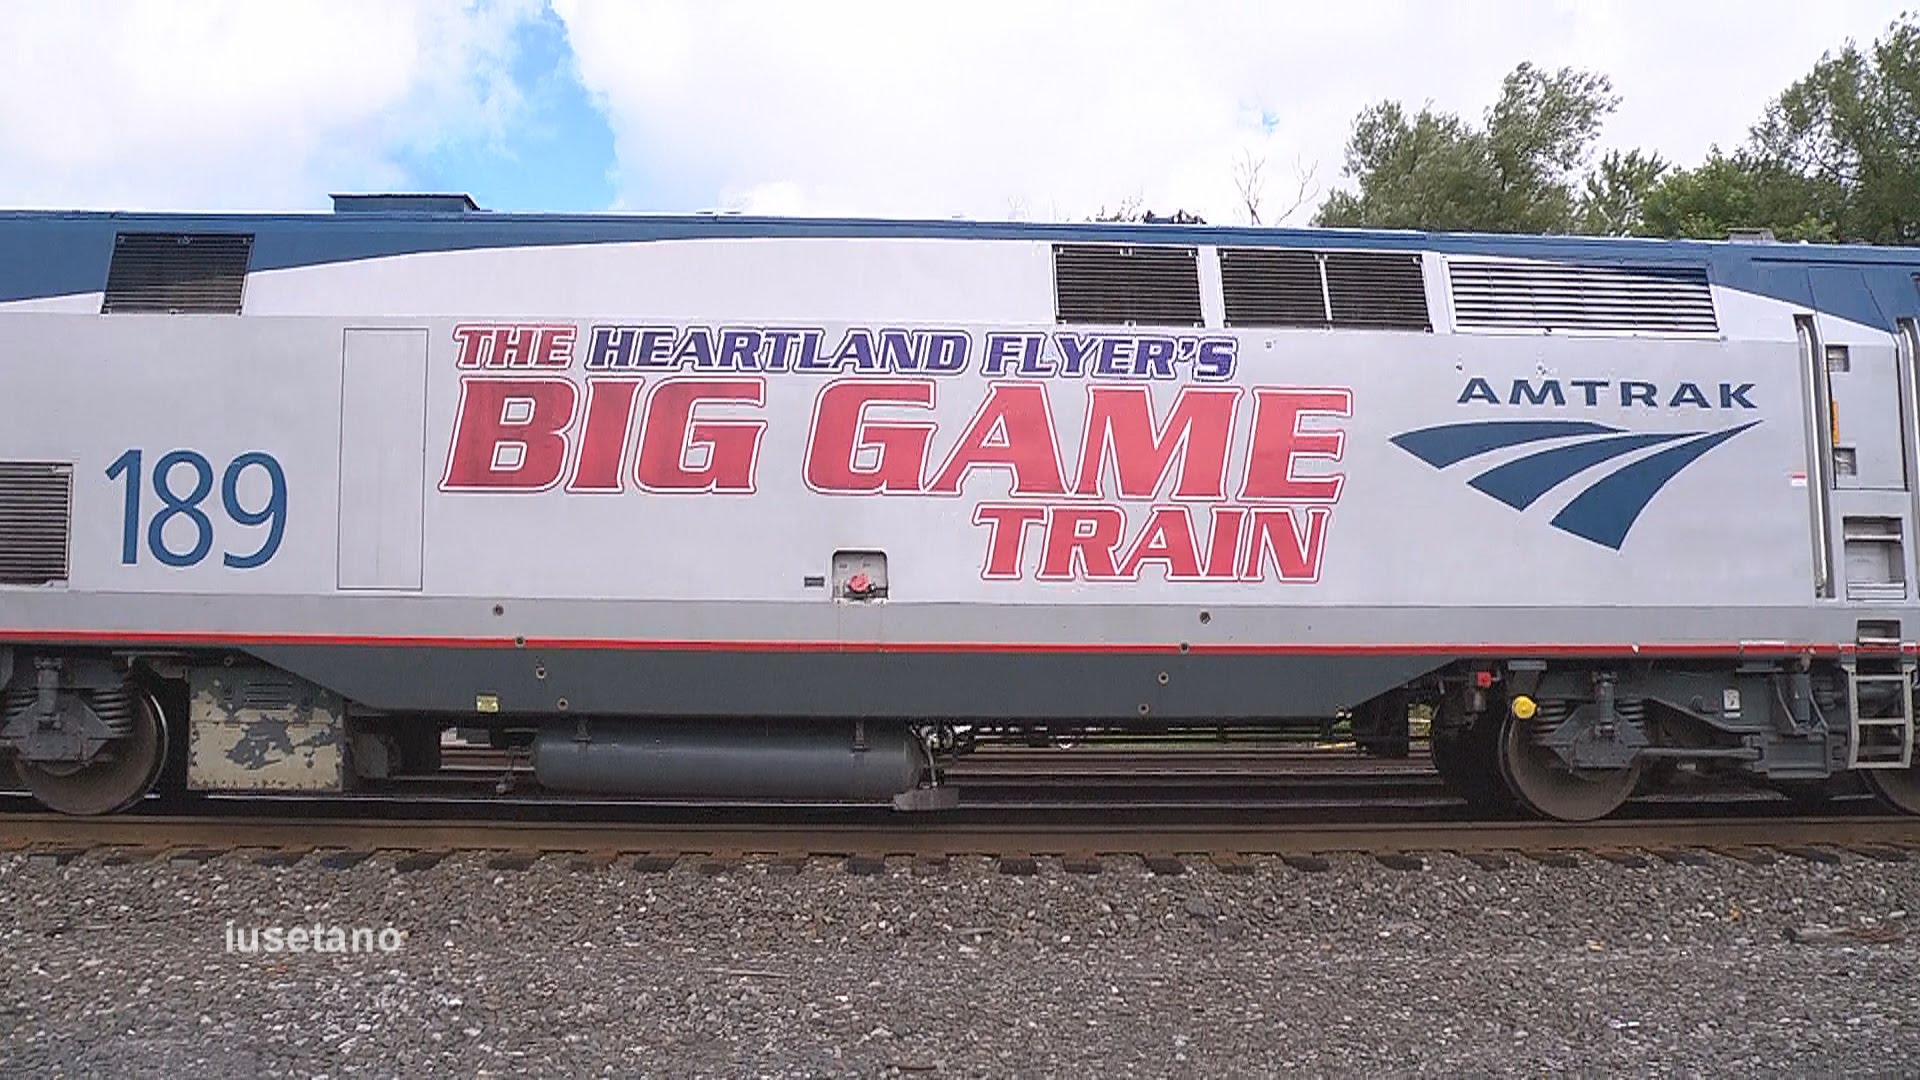 Get your OU/Texas game day plans on track with this Heartland Flyer deal